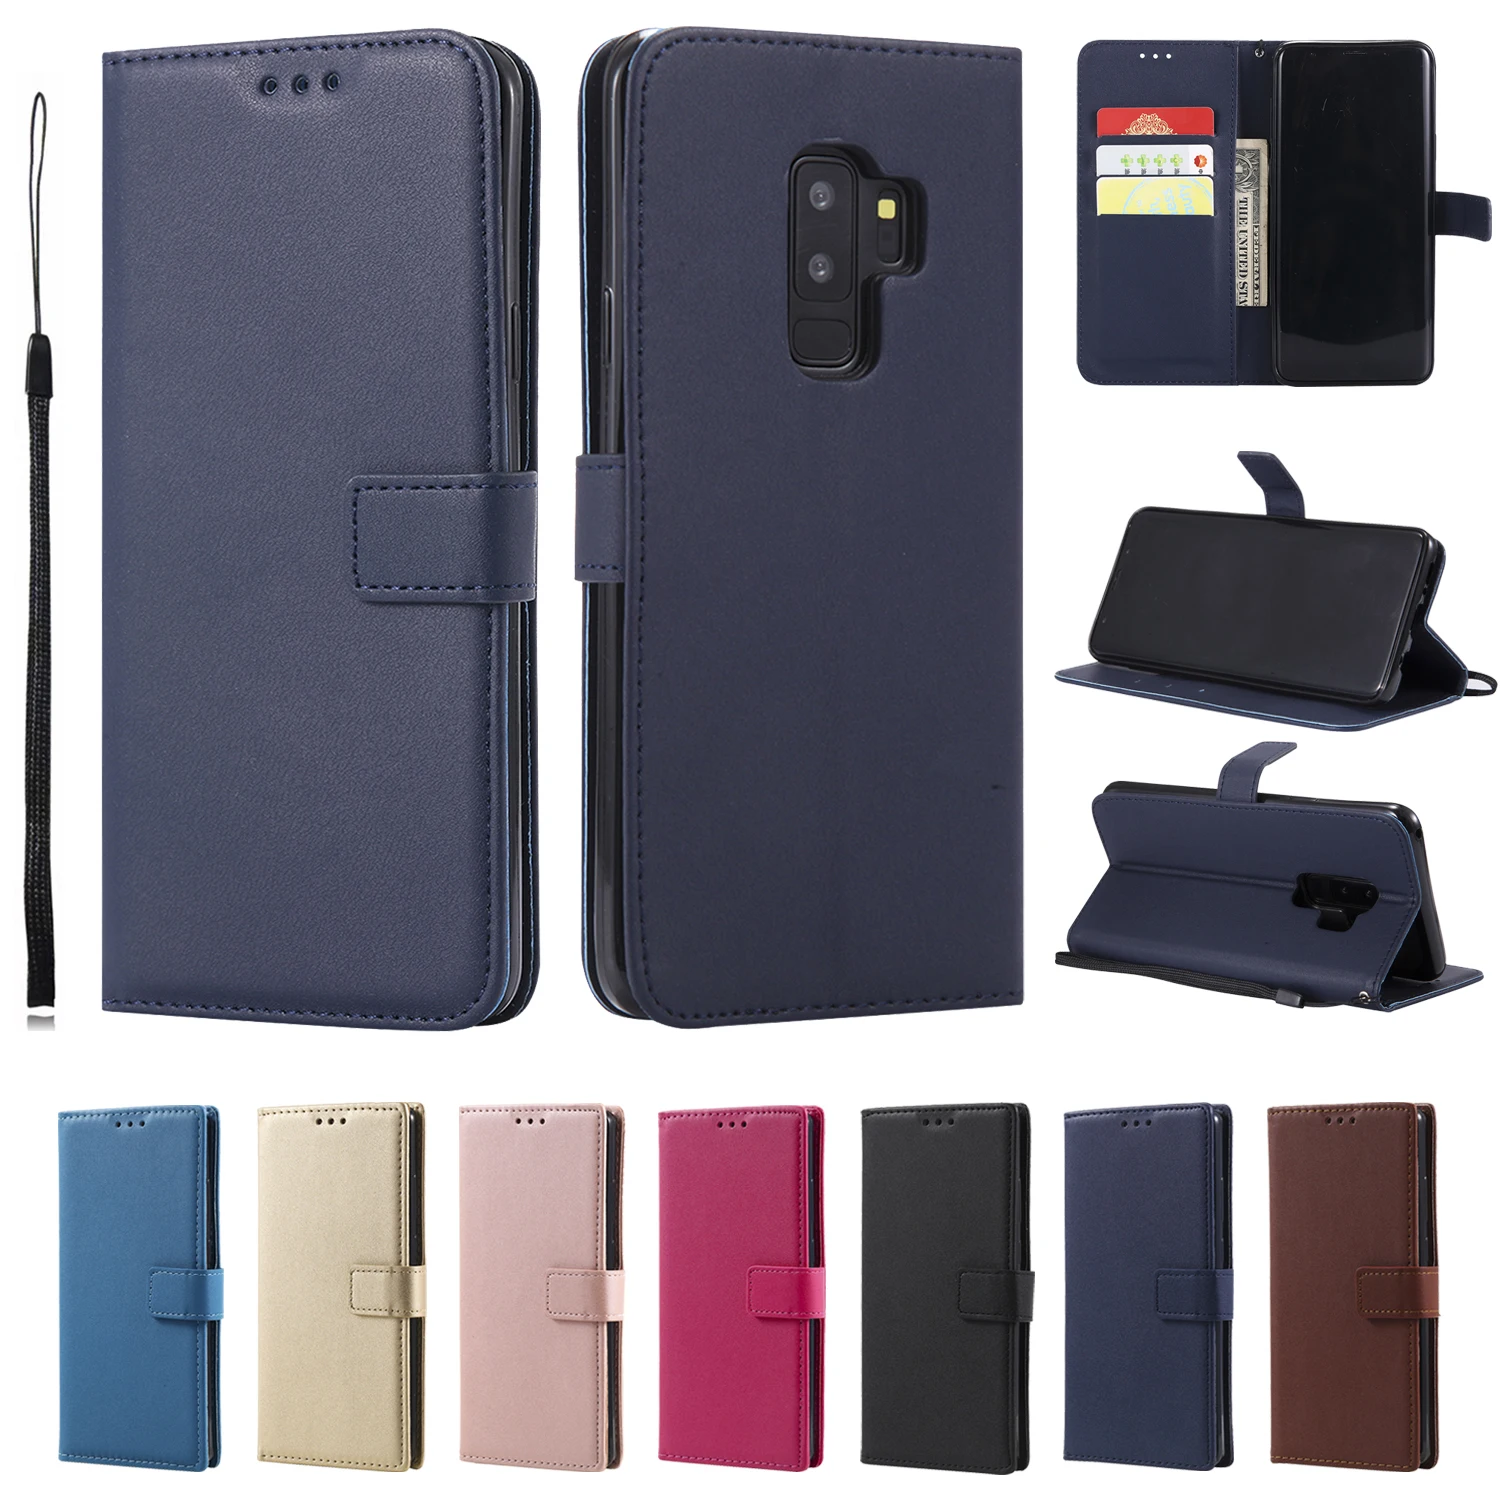 

Flip Case For Galaxy S20 Plus S10E S21 Ultra S9 S8 S7 Edge S6 S5 Mini S4 S3 S20FE Leather Cover Stand Card Slots Soft PU